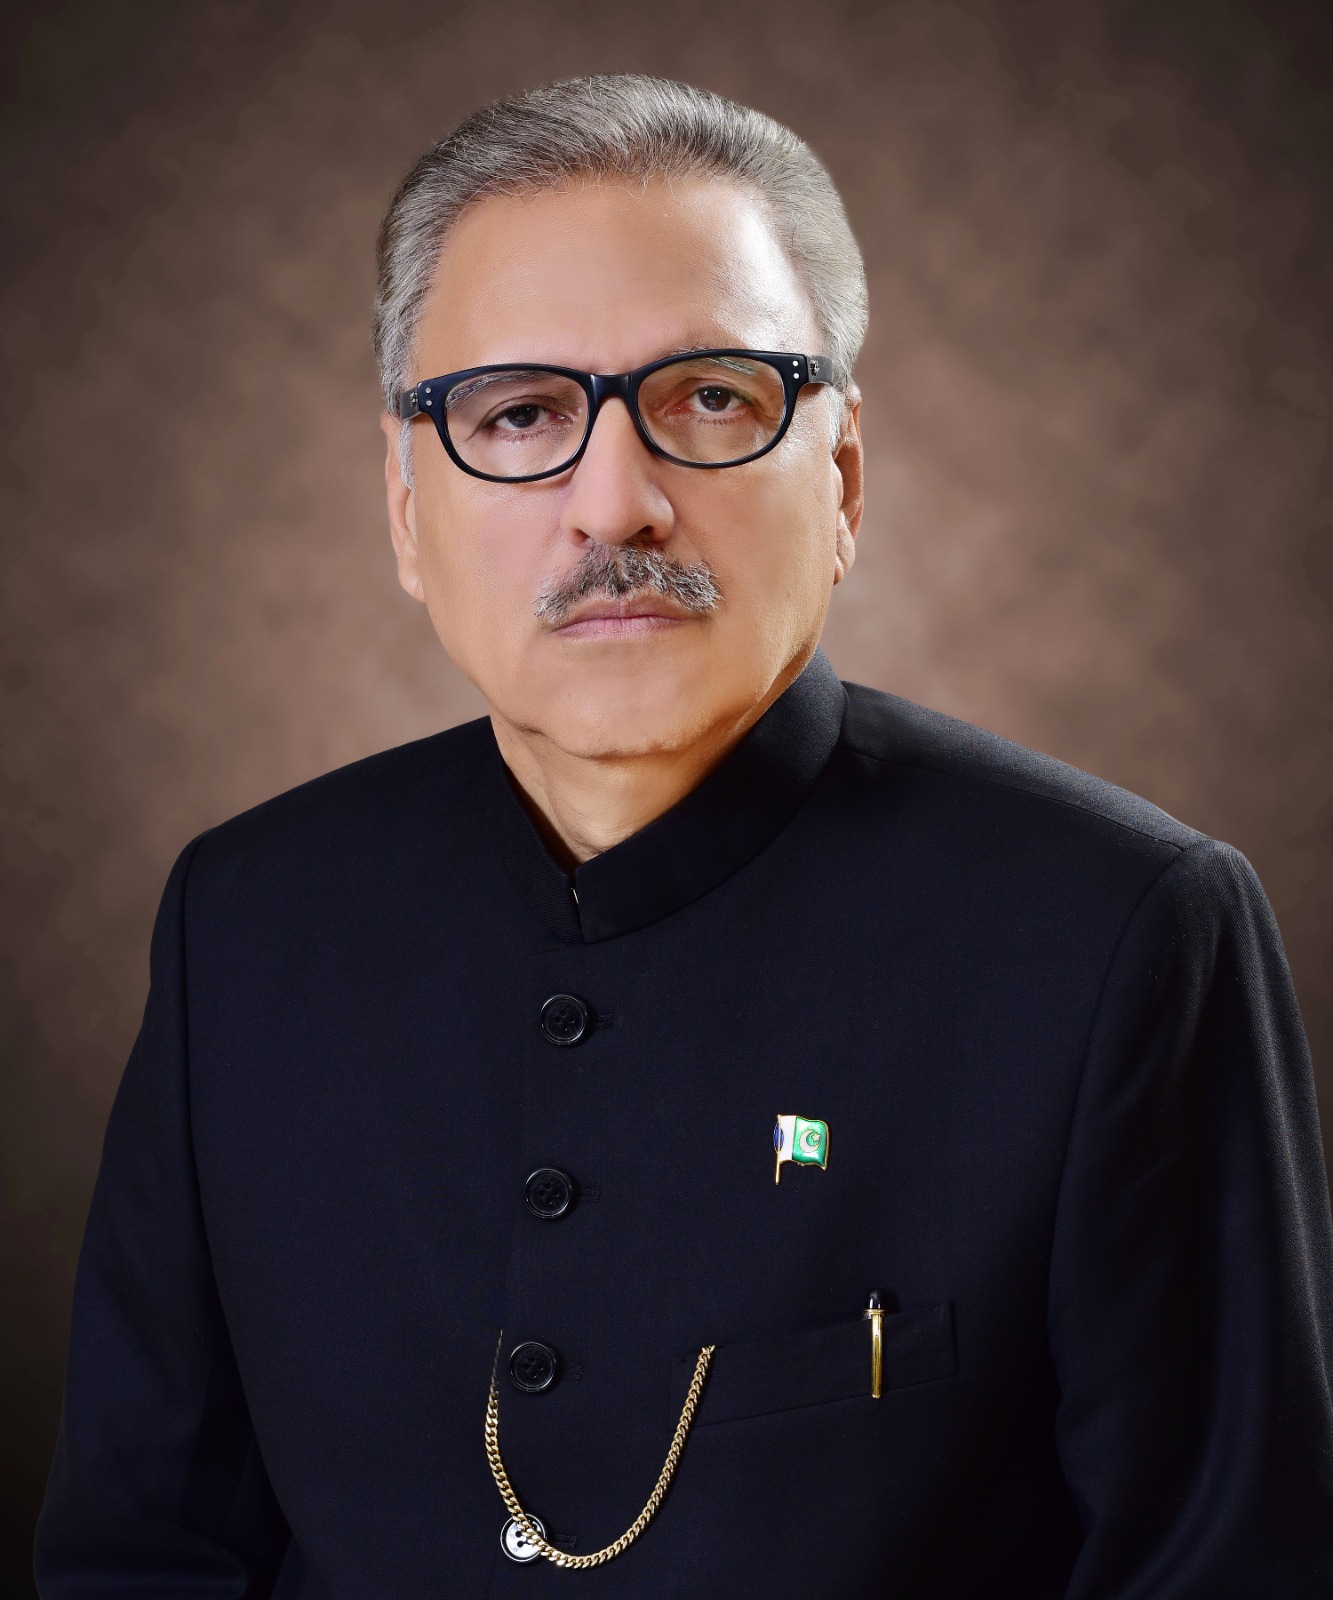 Alvi mourns loss of precious lives in helicopter crash